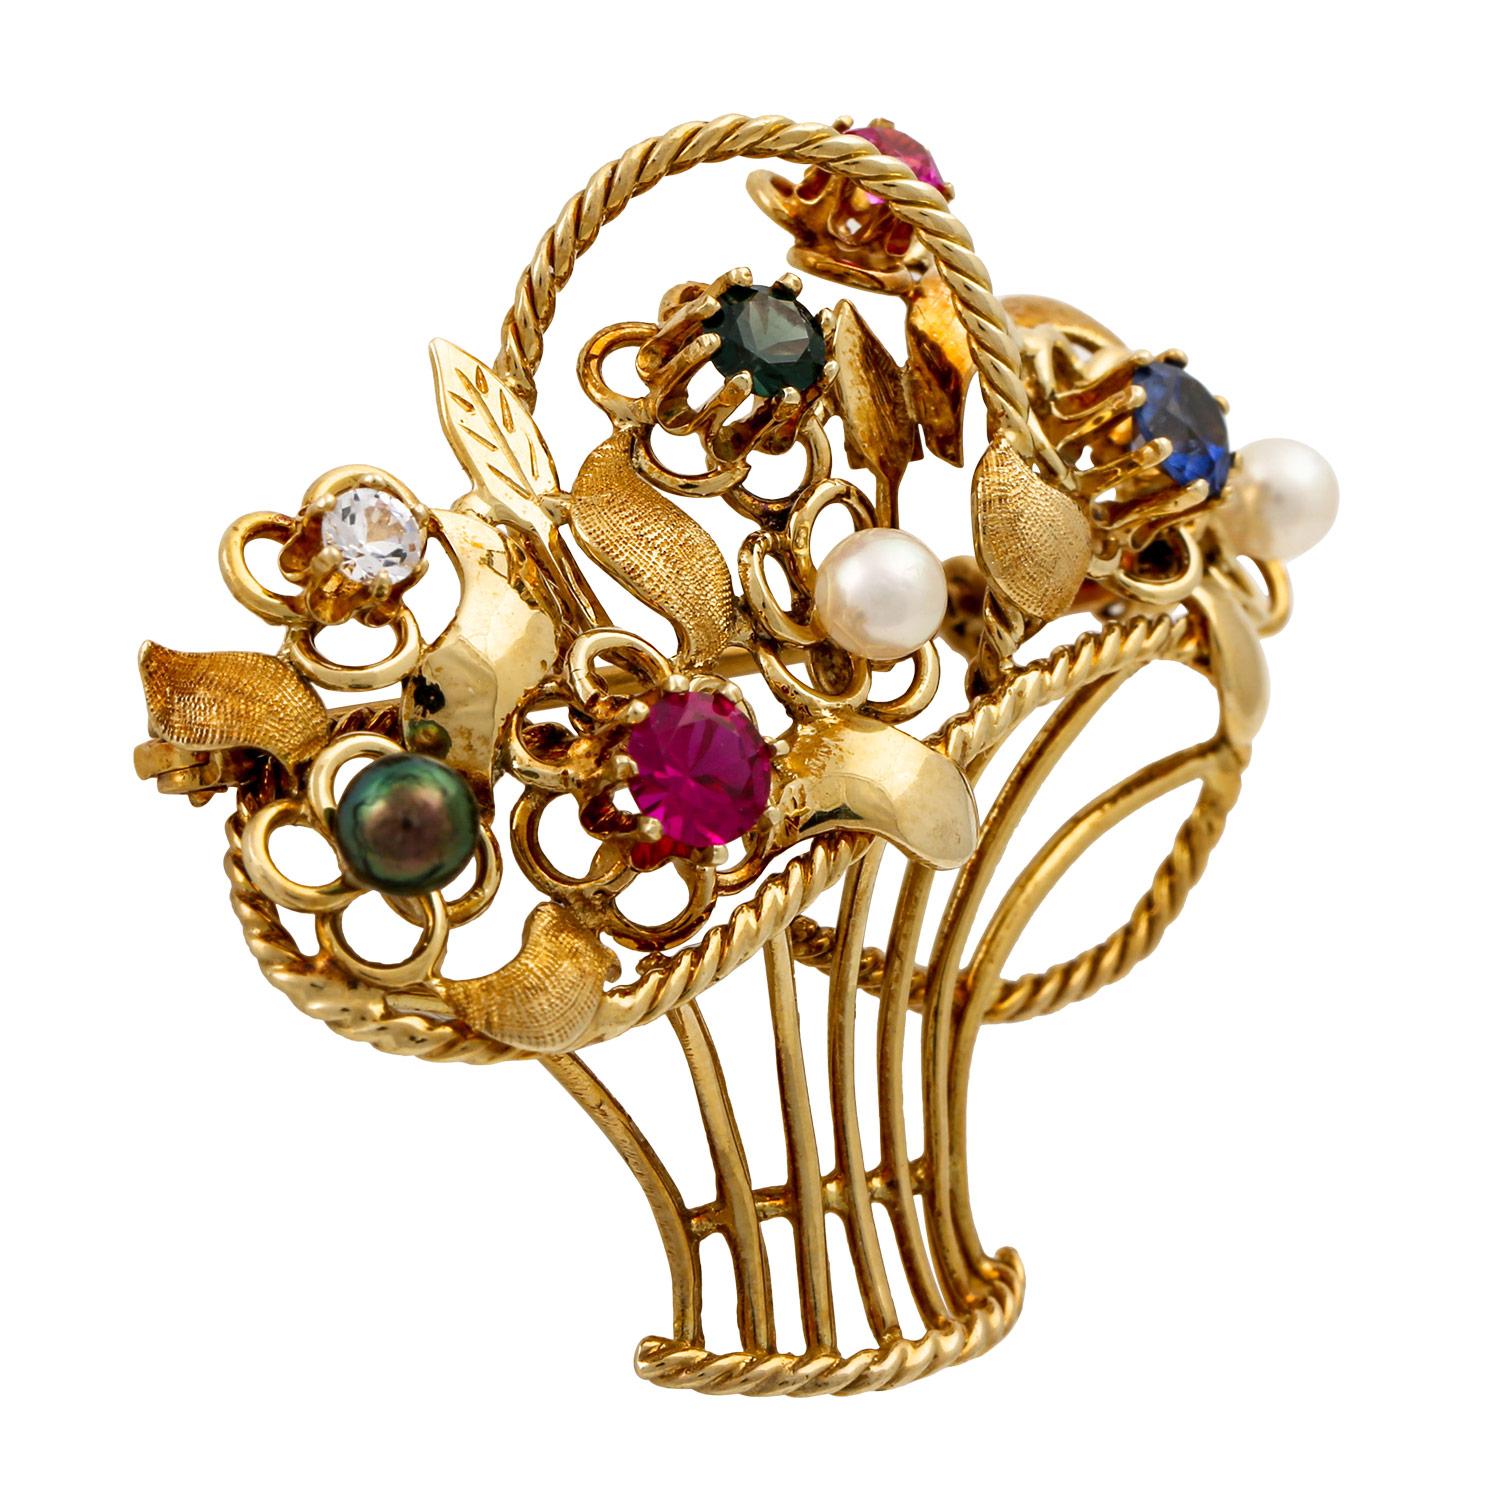 Flower basket brooch set with 1 zirconia, synthetic sapphire, synthetic rub., synthetic spinel and 3 cultured pearls. GG 14K. 15K Handwork!